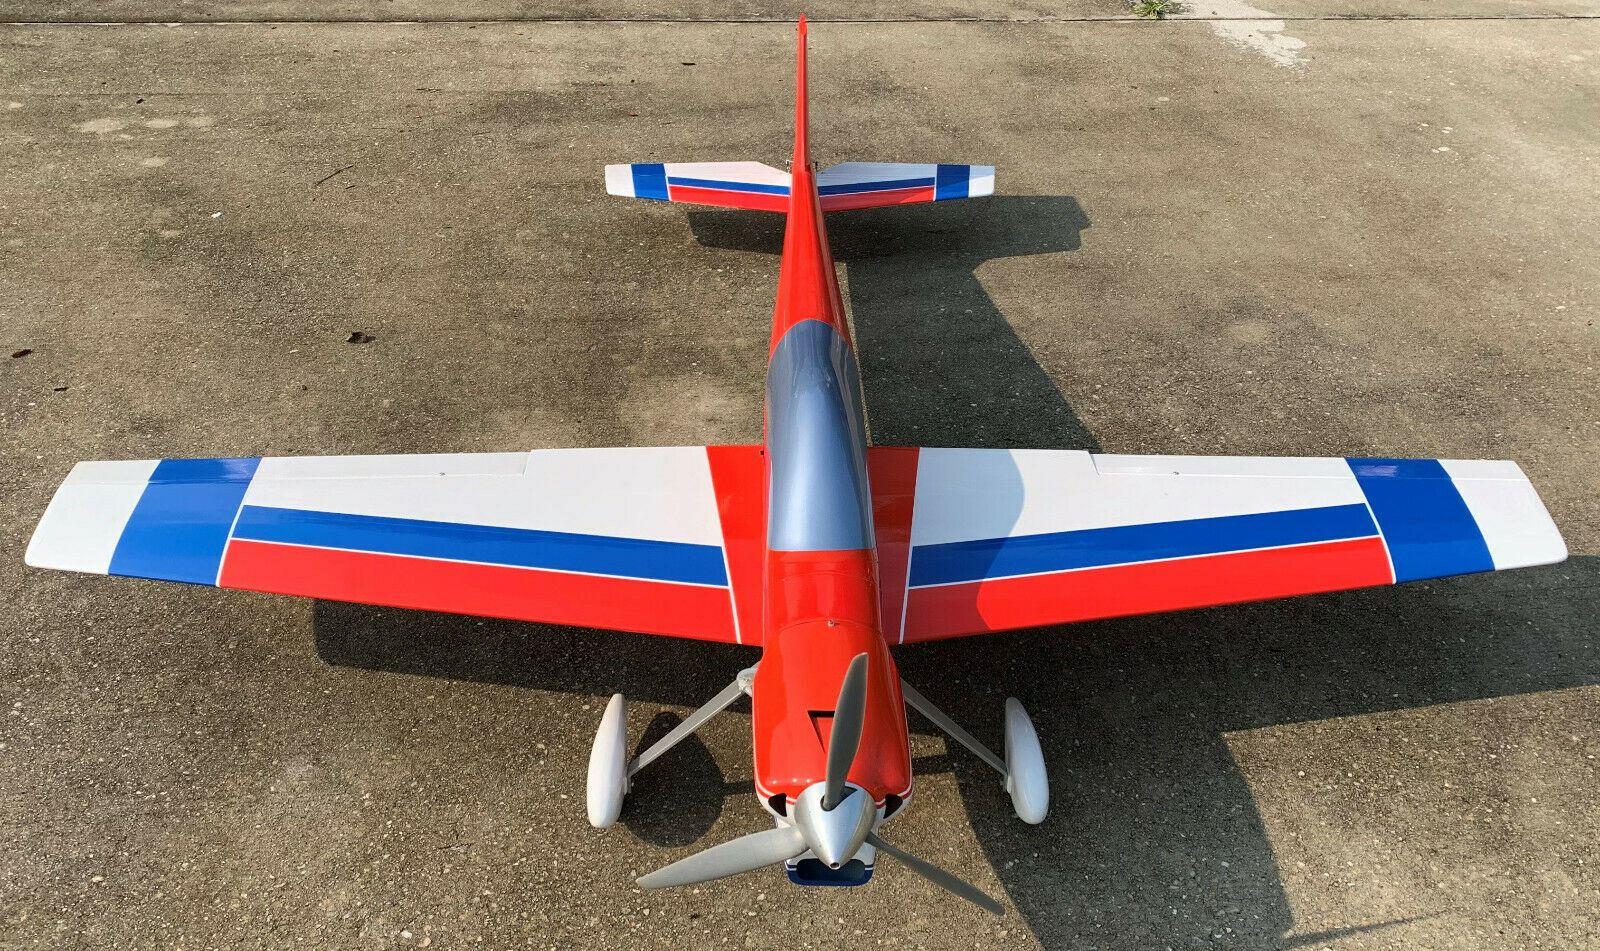 Focus 2 Pattern Rc Airplane By Piedmont Rc, Dave Guerin Builder